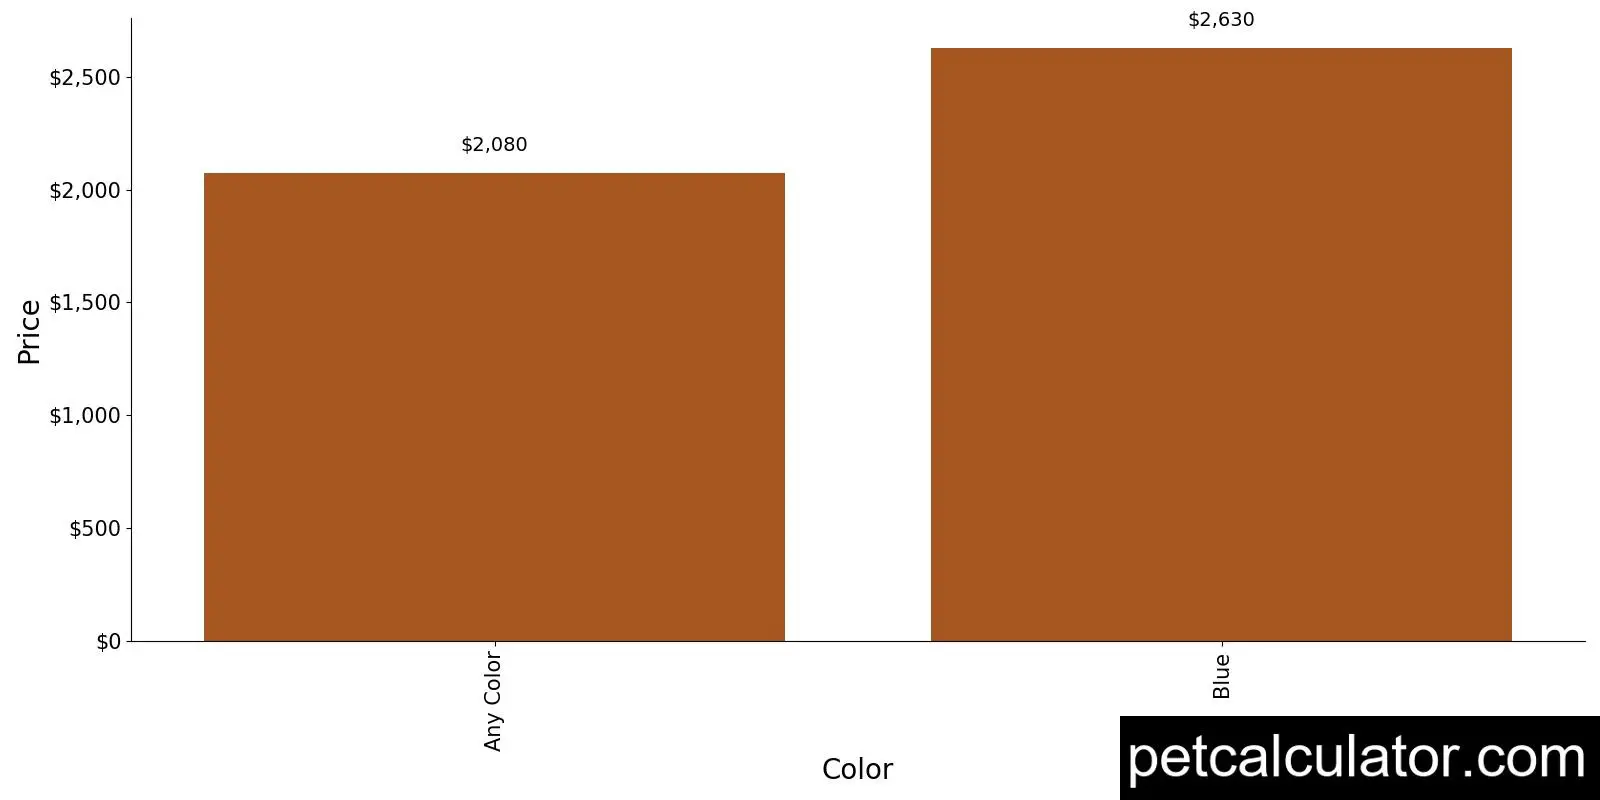 Price of Bedlington Terrier by Color 